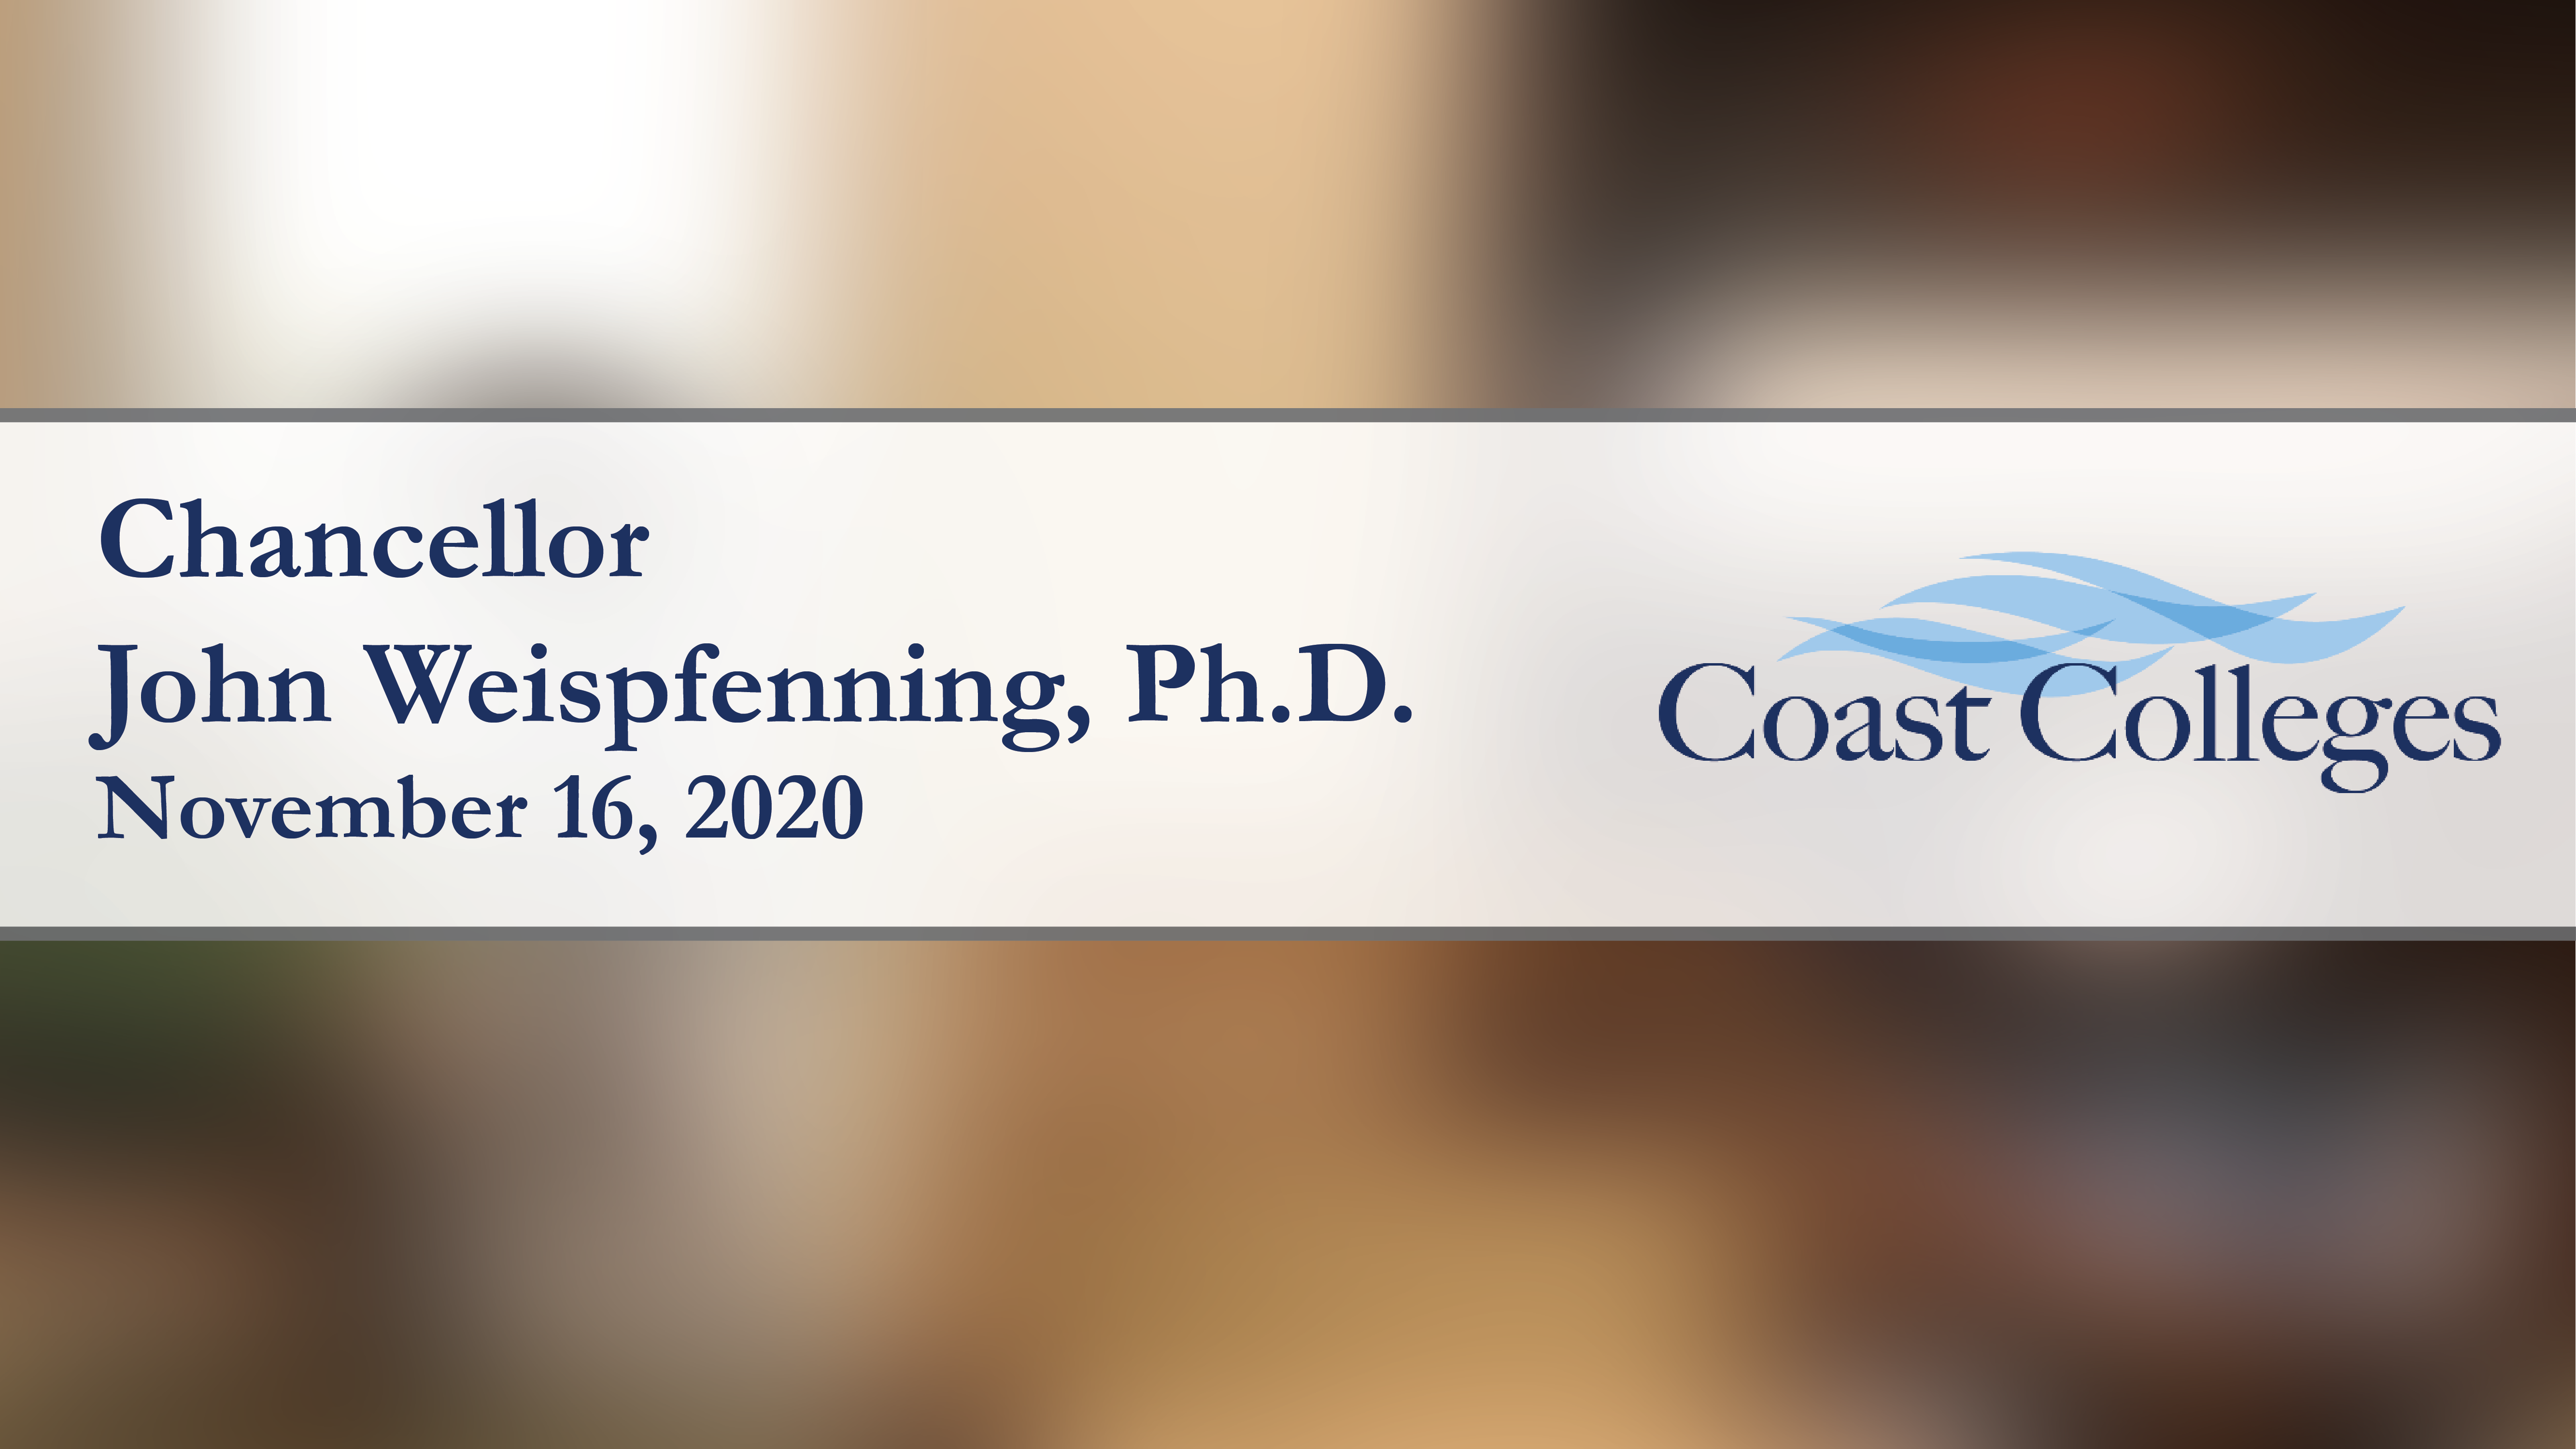 Blurred background of an office, the name Chancellor John Weispfenning, Ph.D., the date November 16, 2020, and the Coast Colleges logo with those words over blue waves